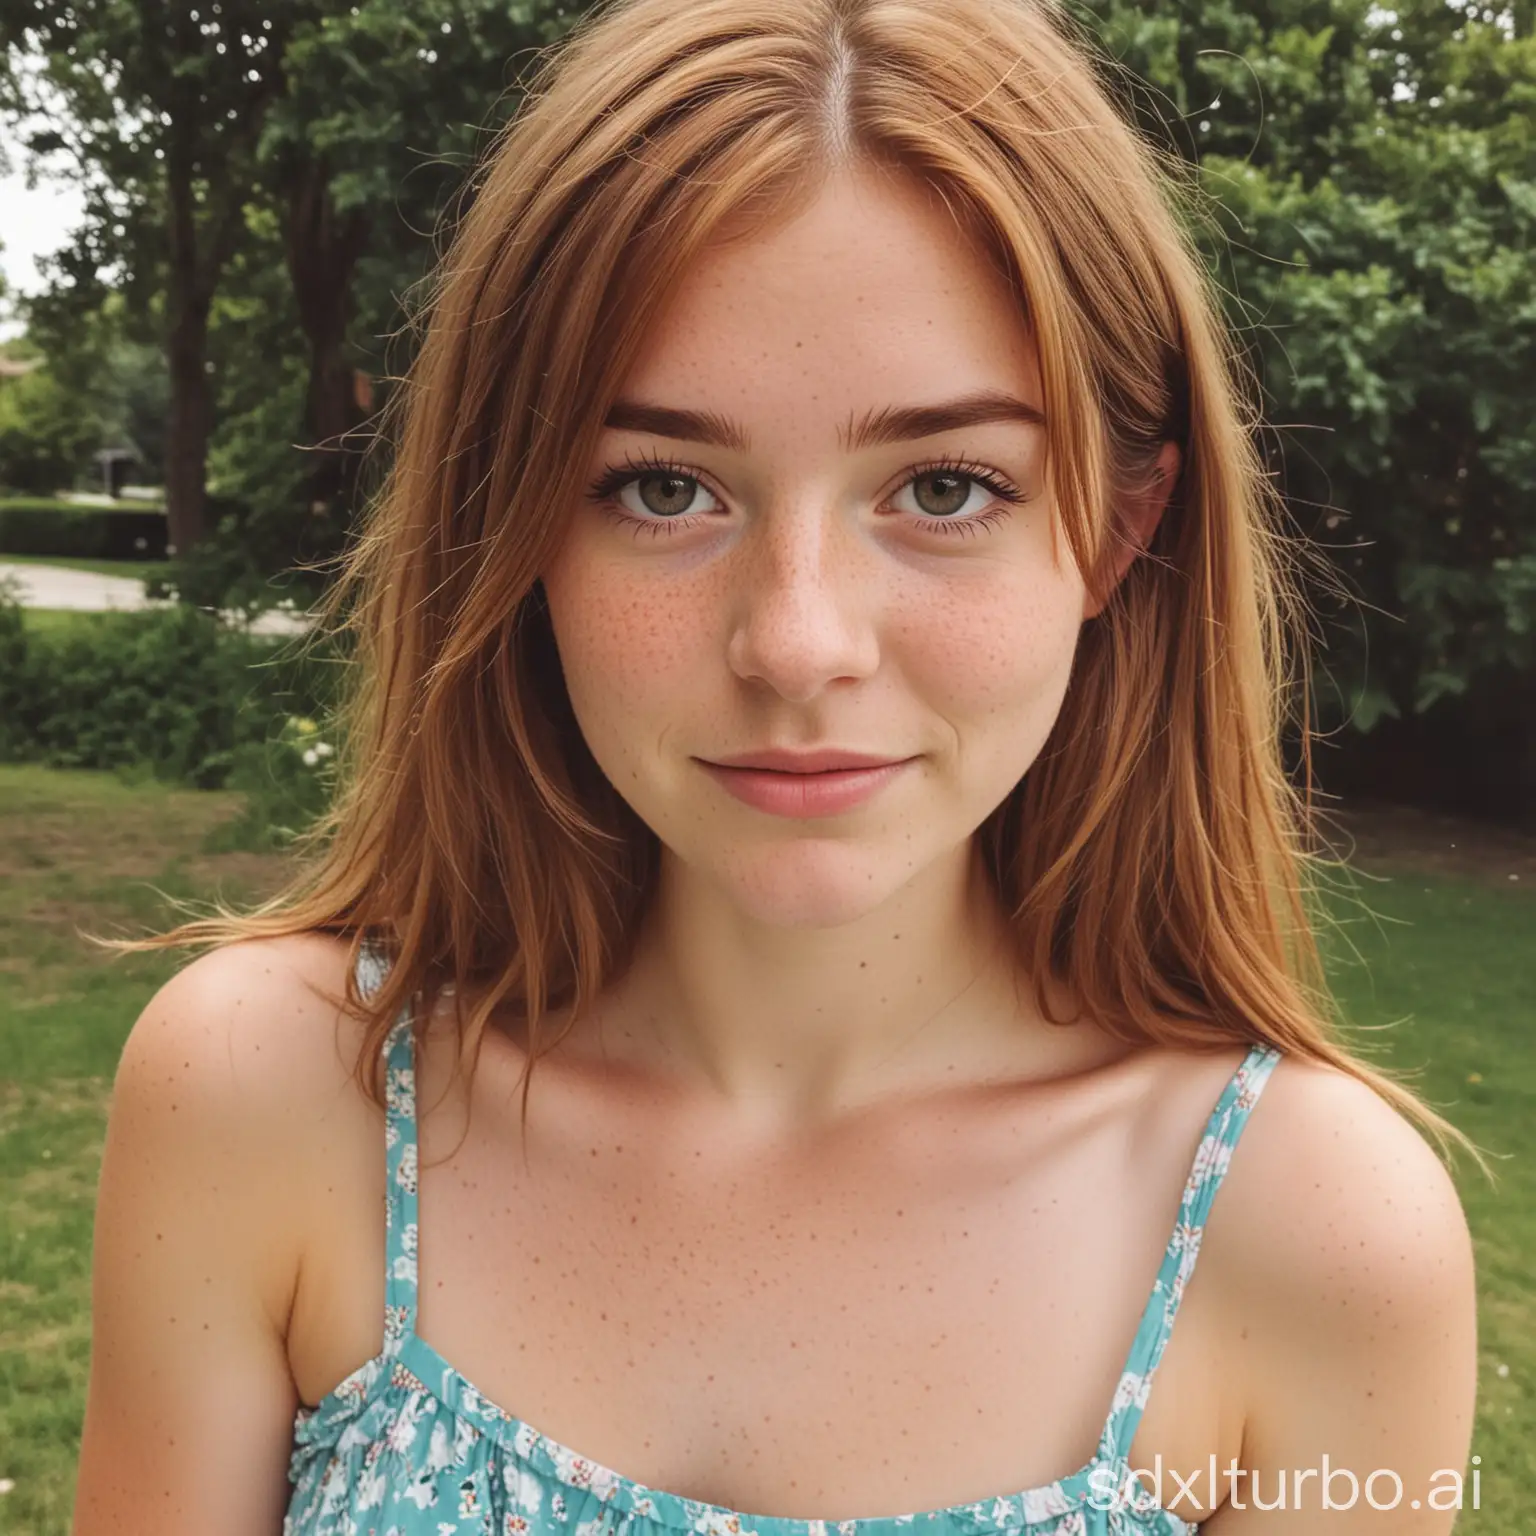 Cute-18YearOld-Girl-with-Freckles-in-Light-Brown-Hair-and-Summer-Dress